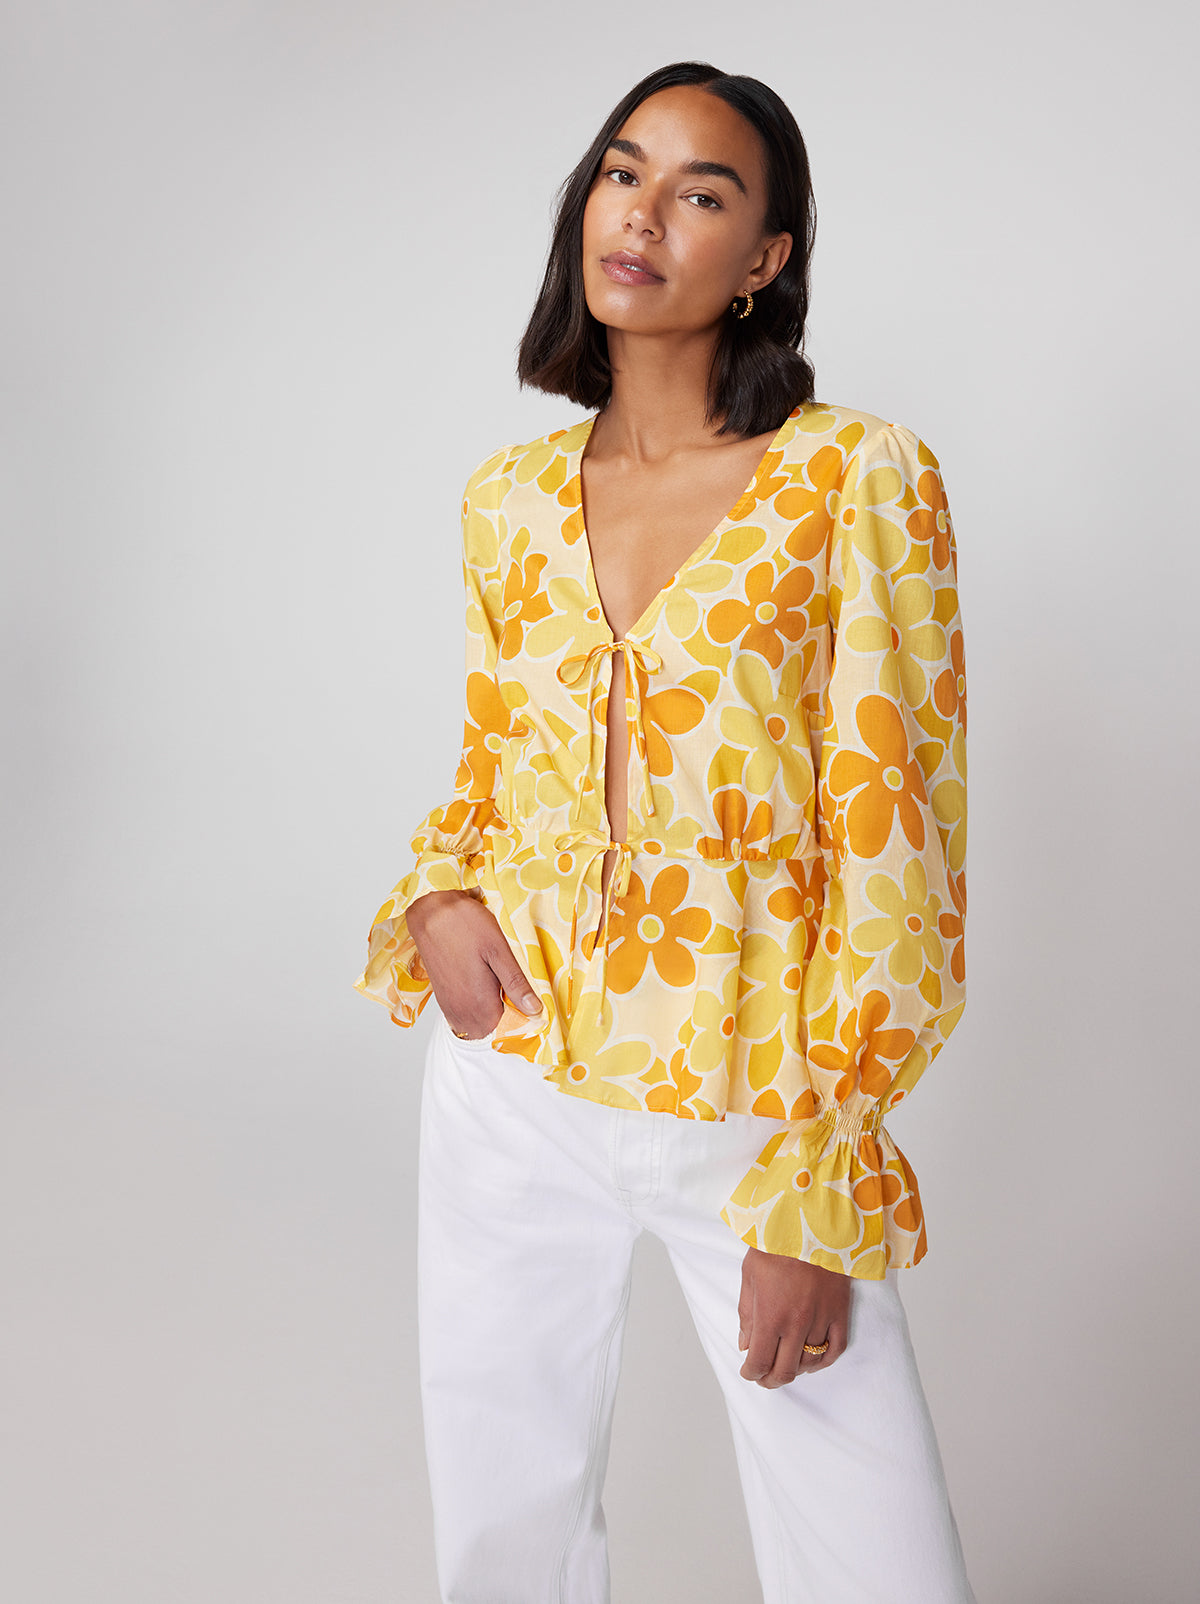 Etta Yellow Floral Print Tie Front Top By KITRI Studio